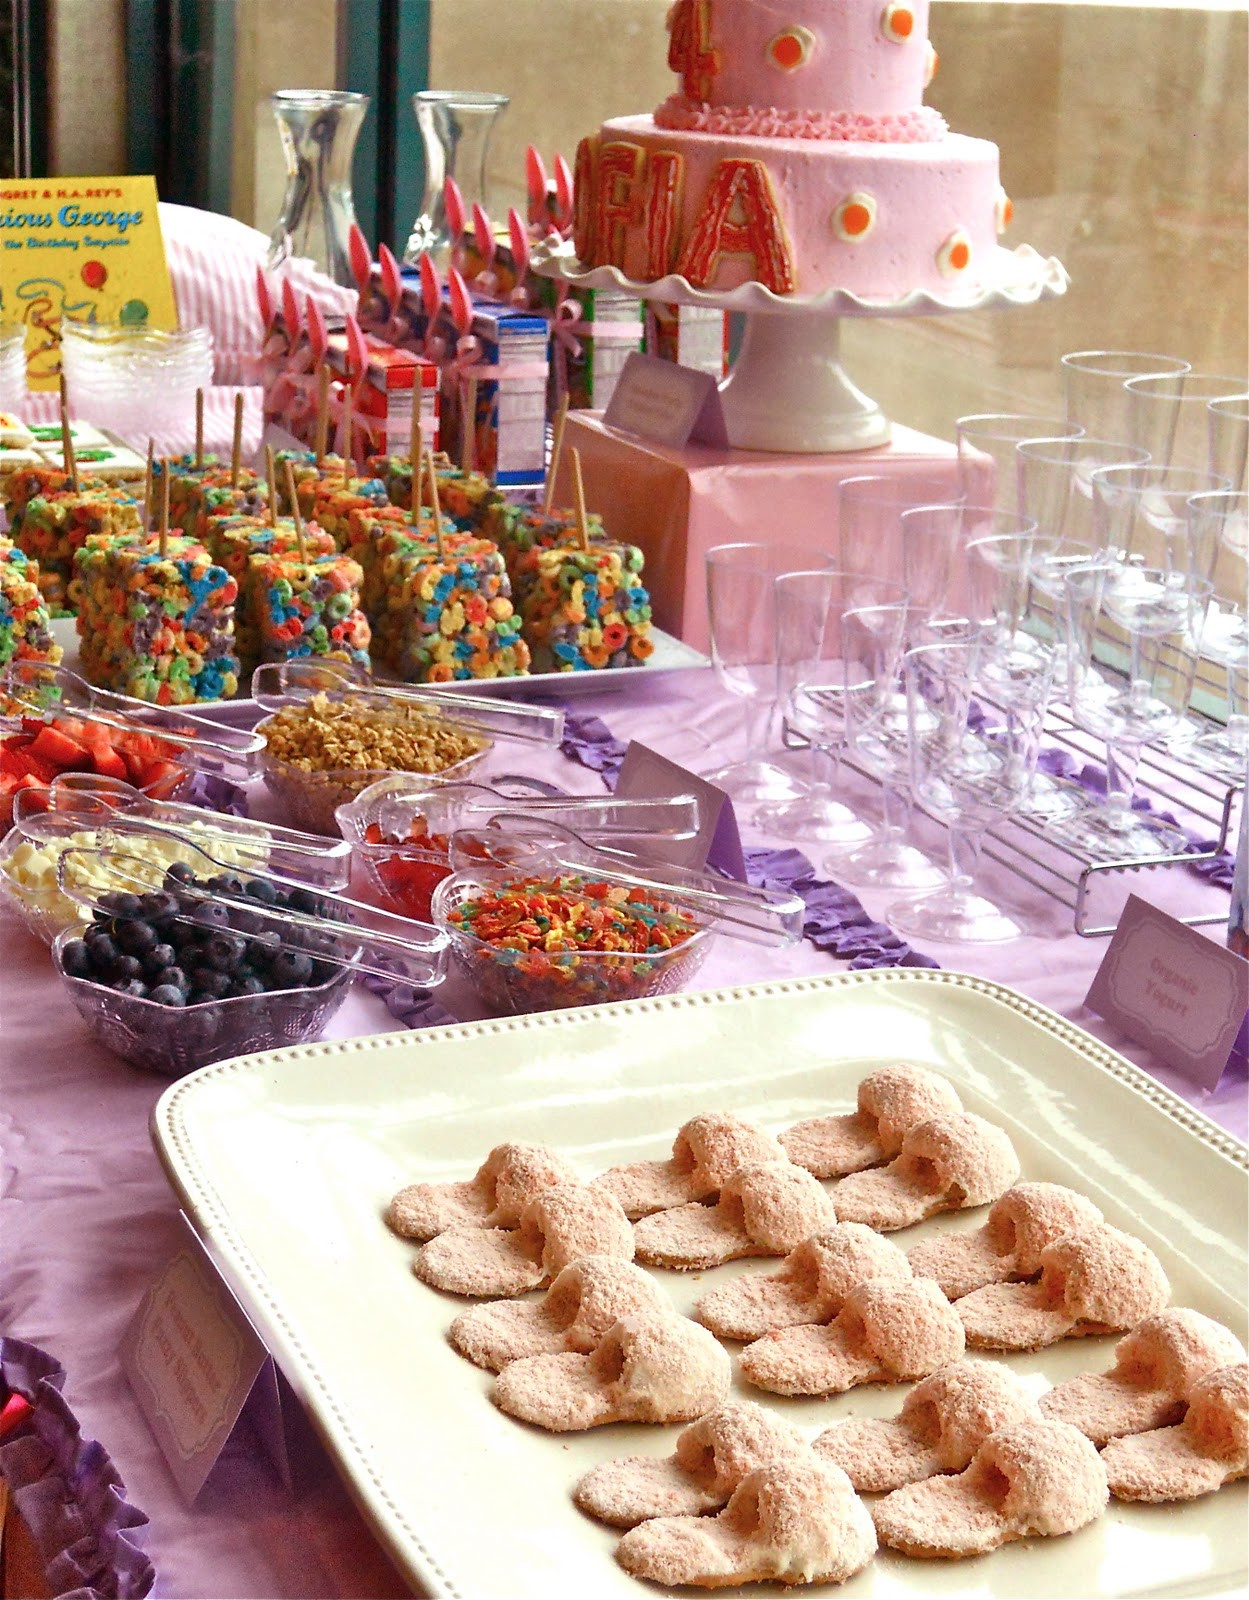 Girl Birthday Party Food Ideas
 Oh Sugar Events Pajama Party